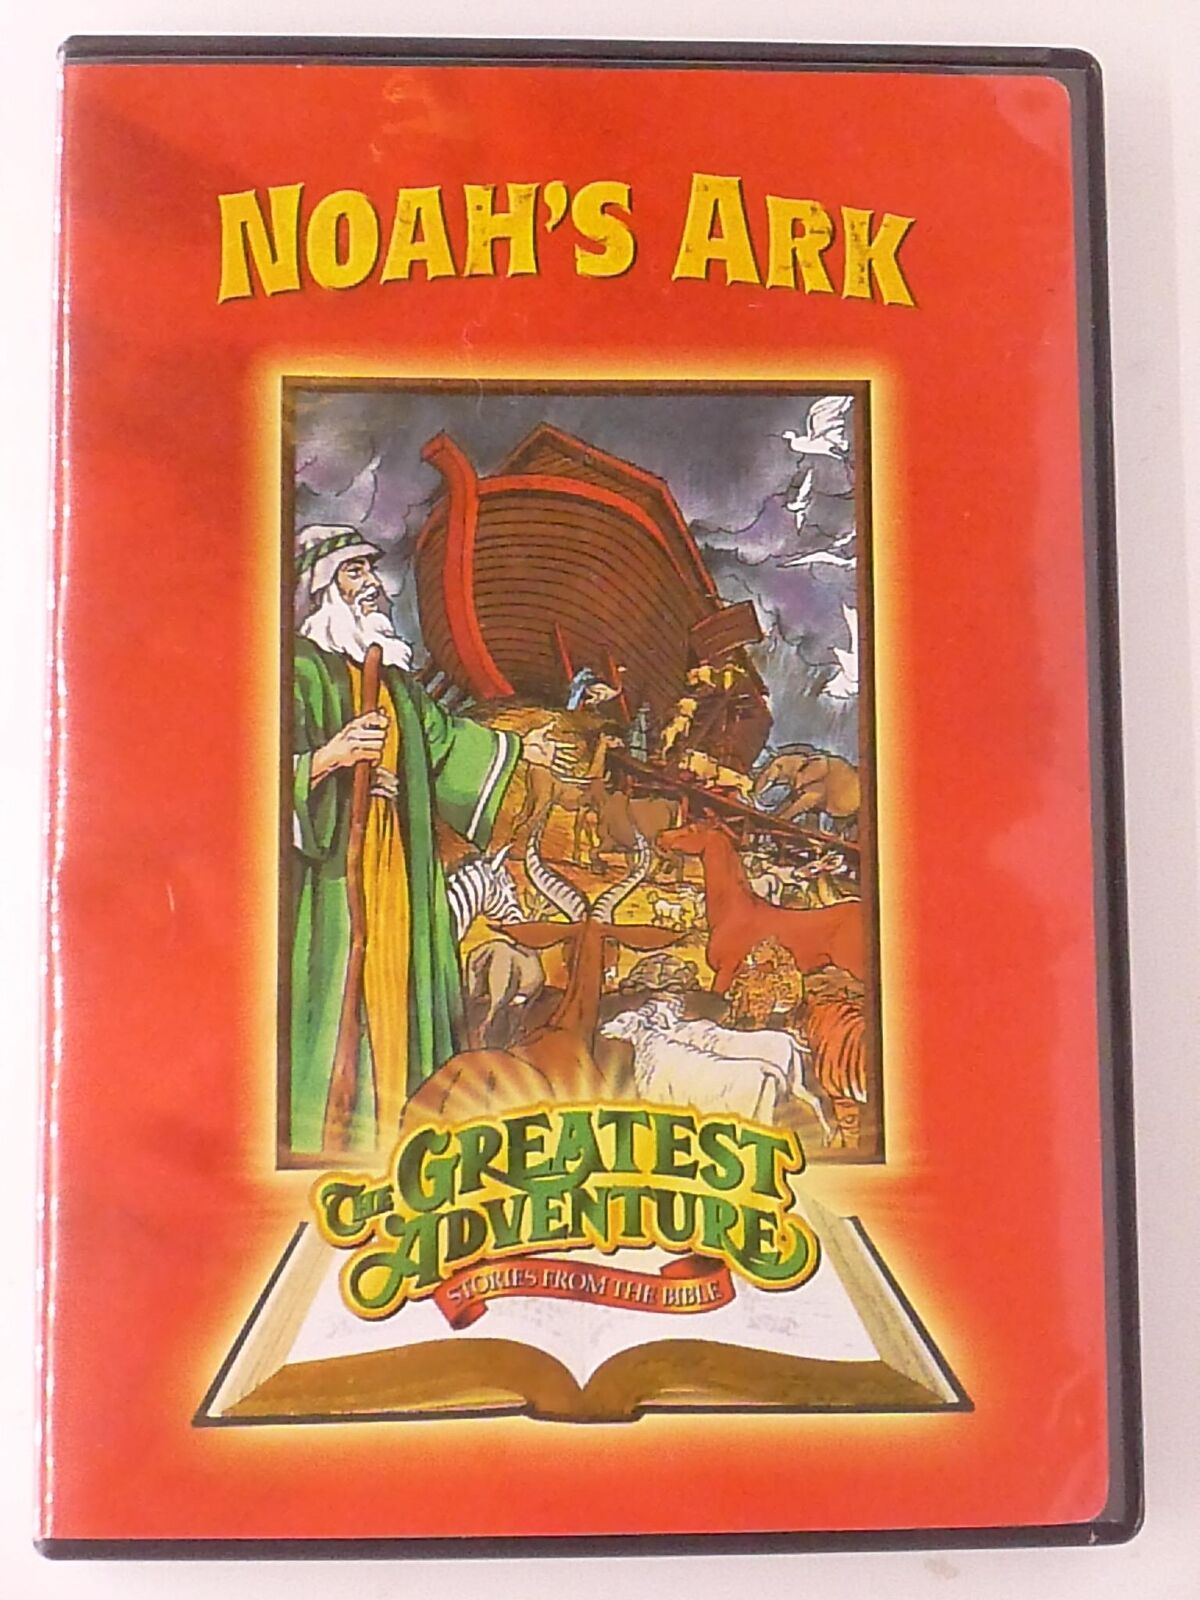 Noahs Ark - The Greatest Adventure Stories from the Bible (DVD) - J0409